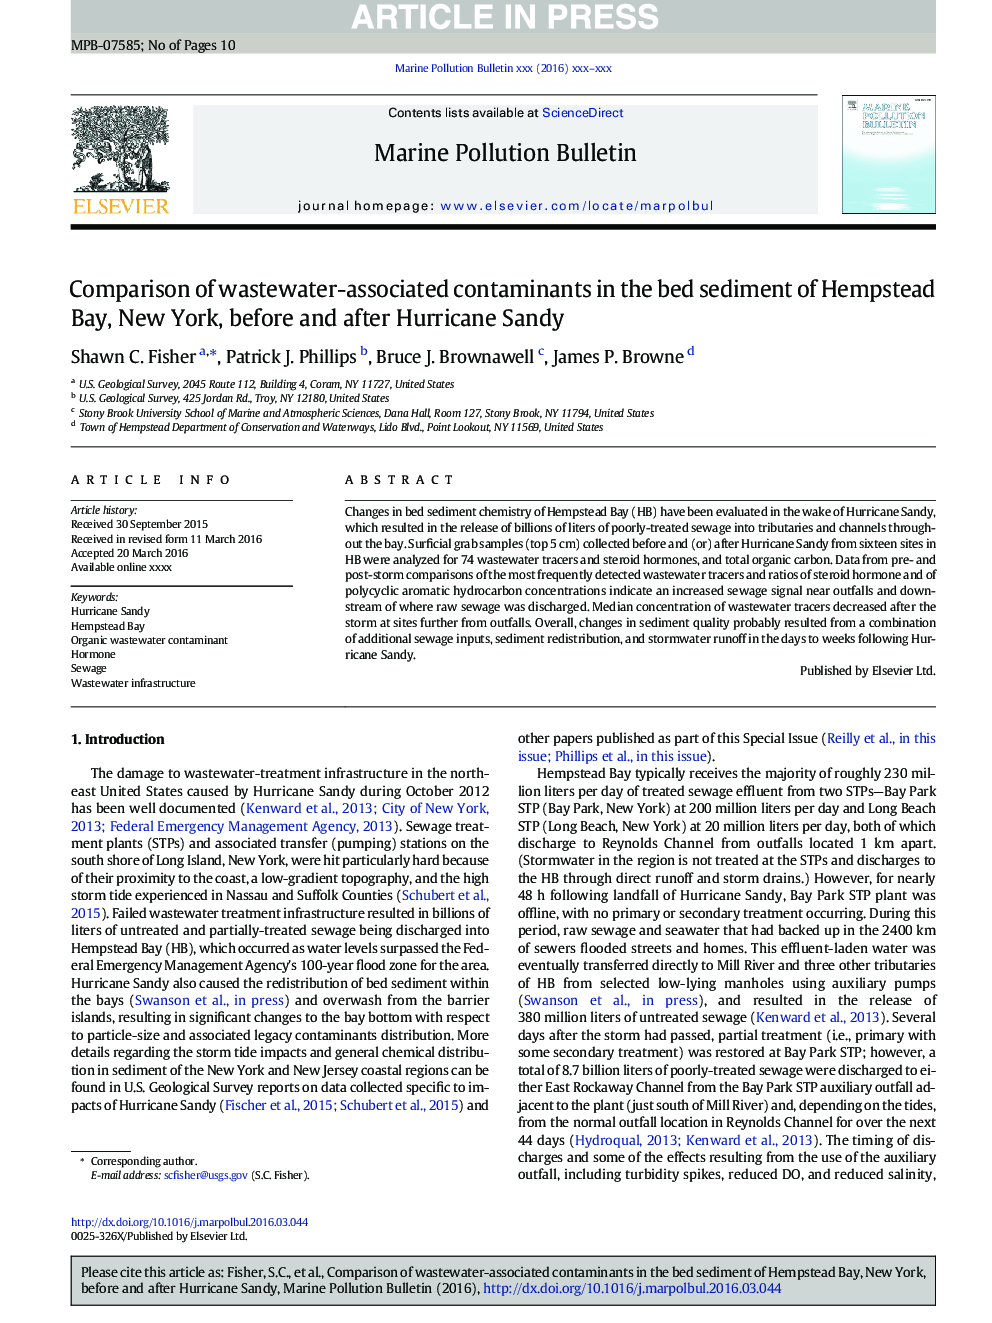 Comparison of wastewater-associated contaminants in the bed sediment of Hempstead Bay, New York, before and after Hurricane Sandy